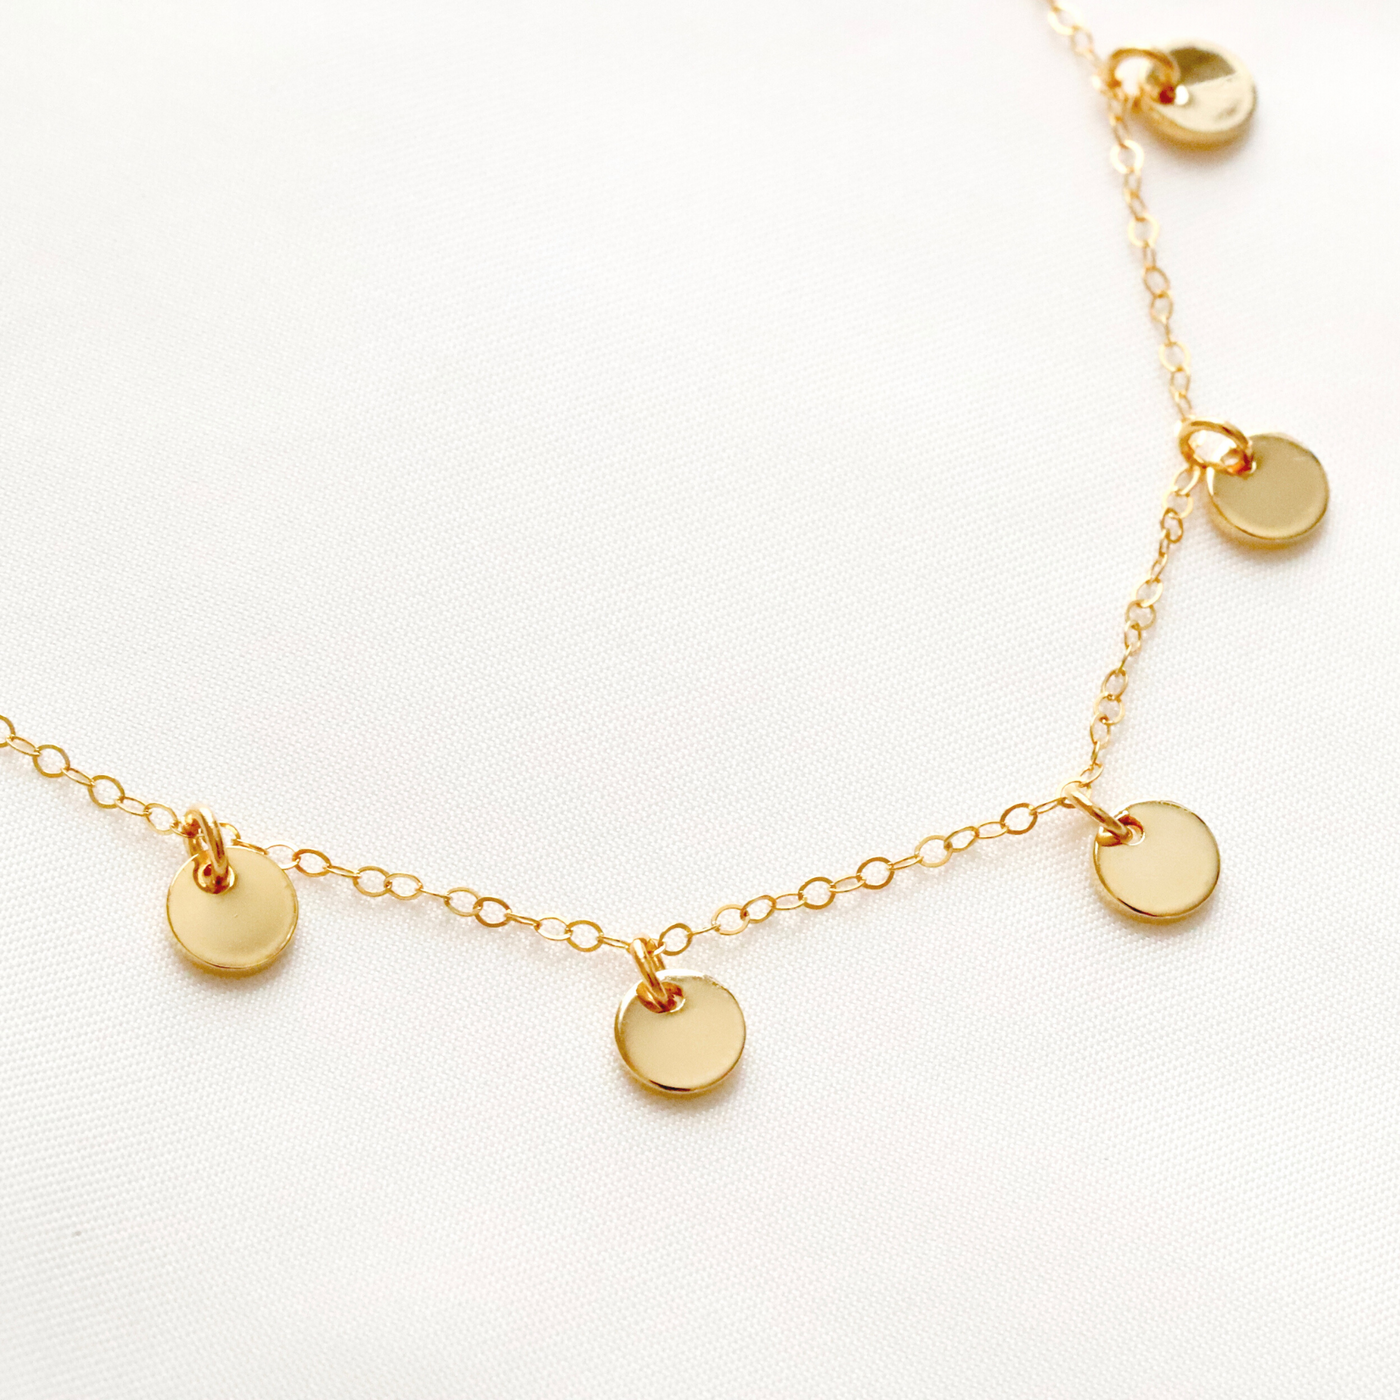 Gold boho necklace with discs